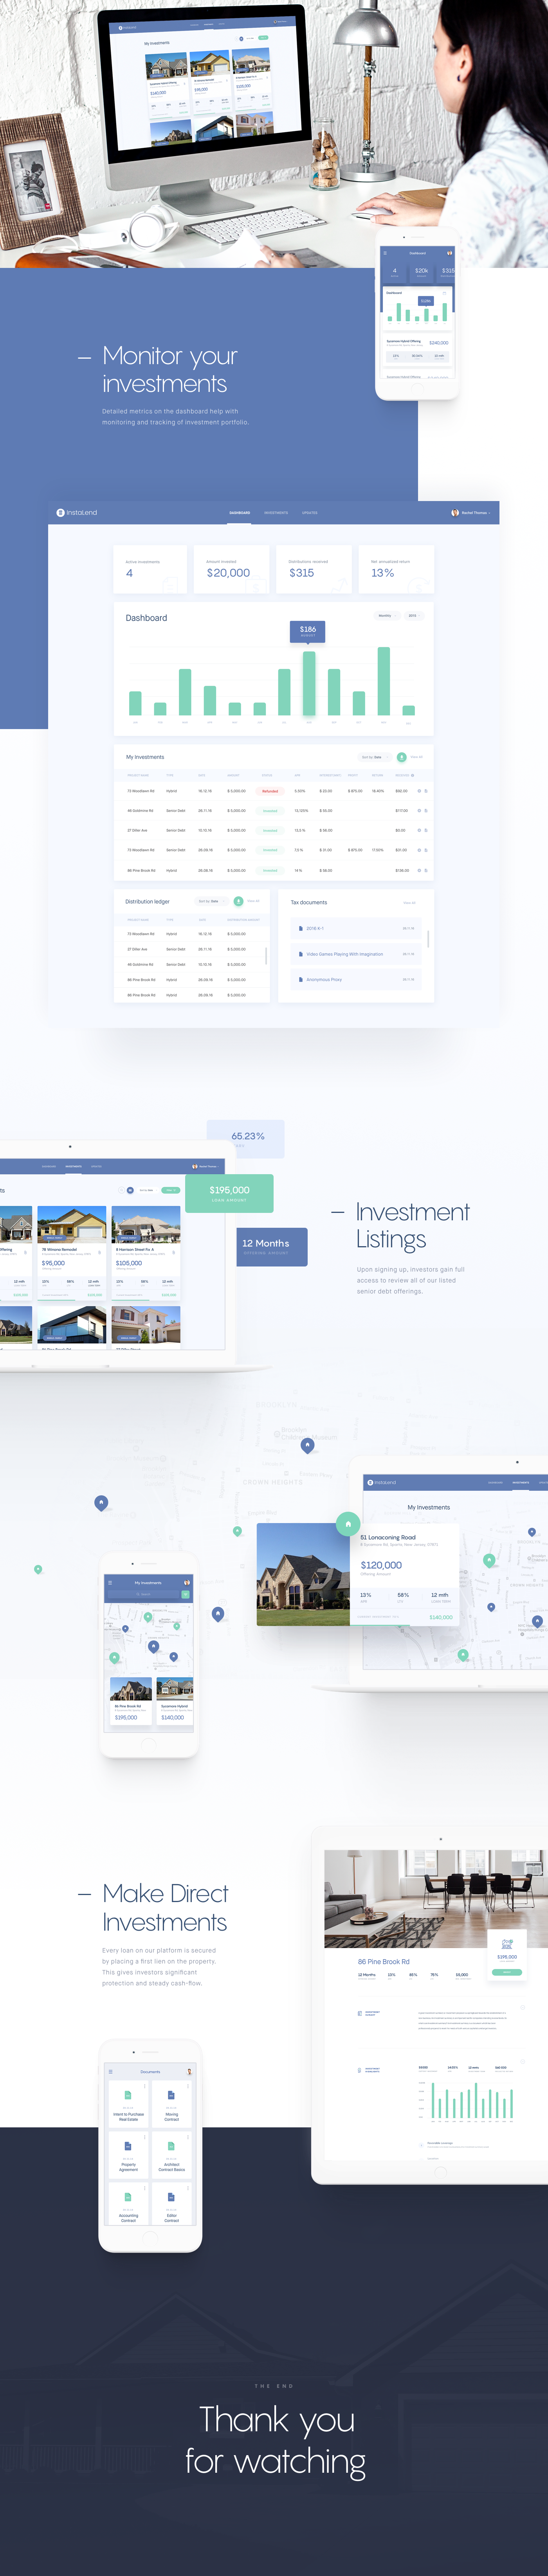 design Experience Interface page UI Web Website real estate Webdesign